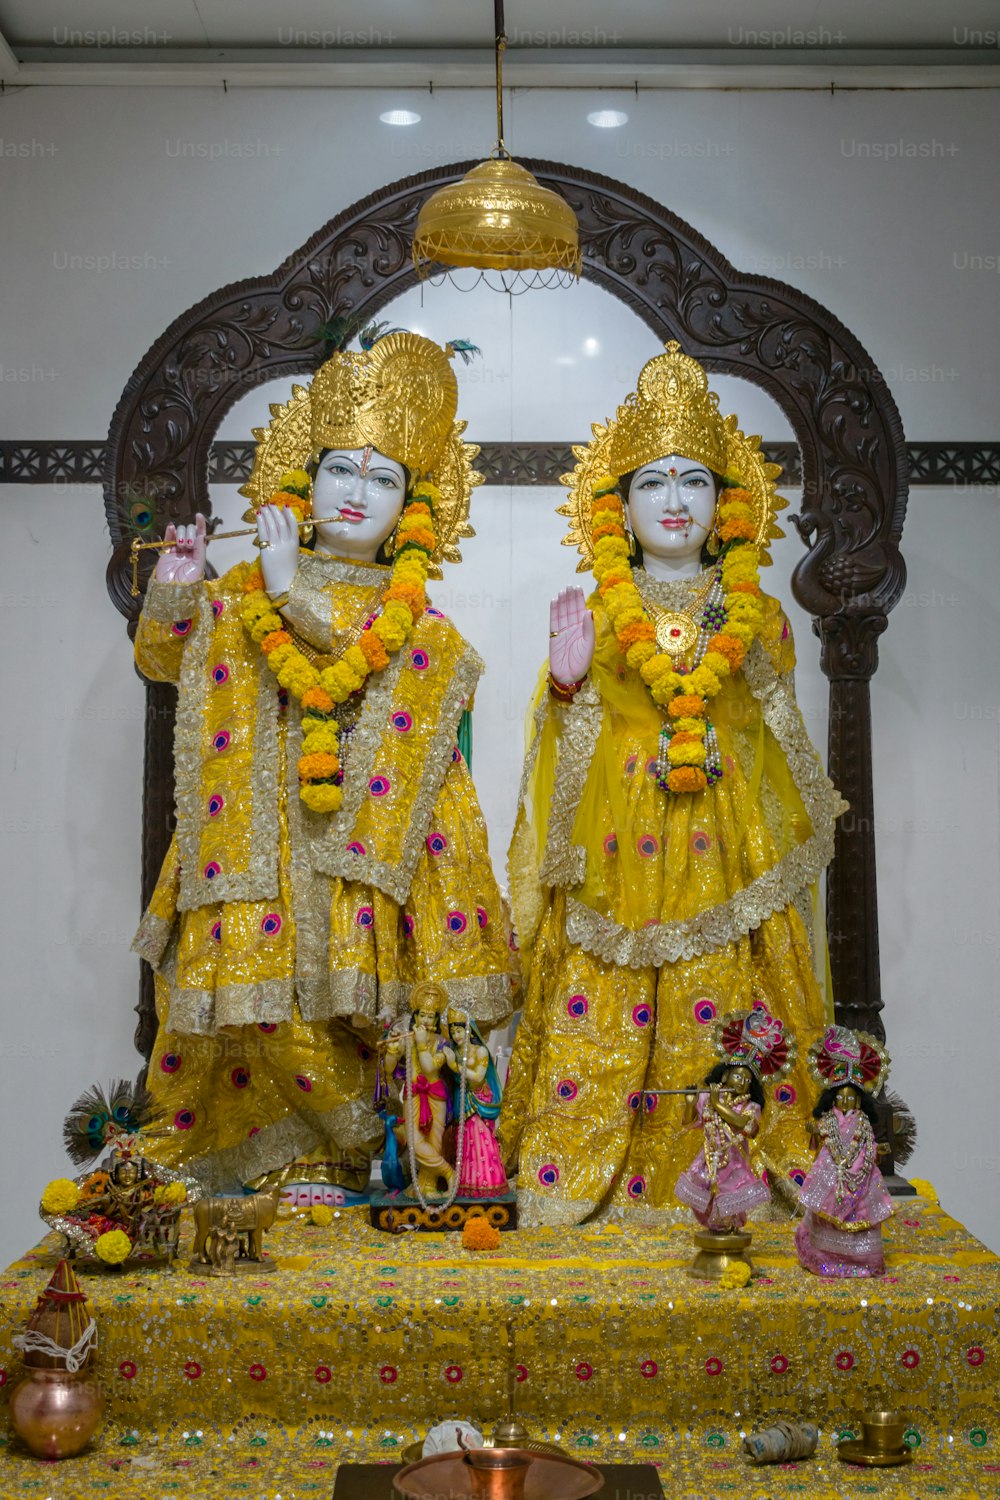 a statue of two people dressed in yellow